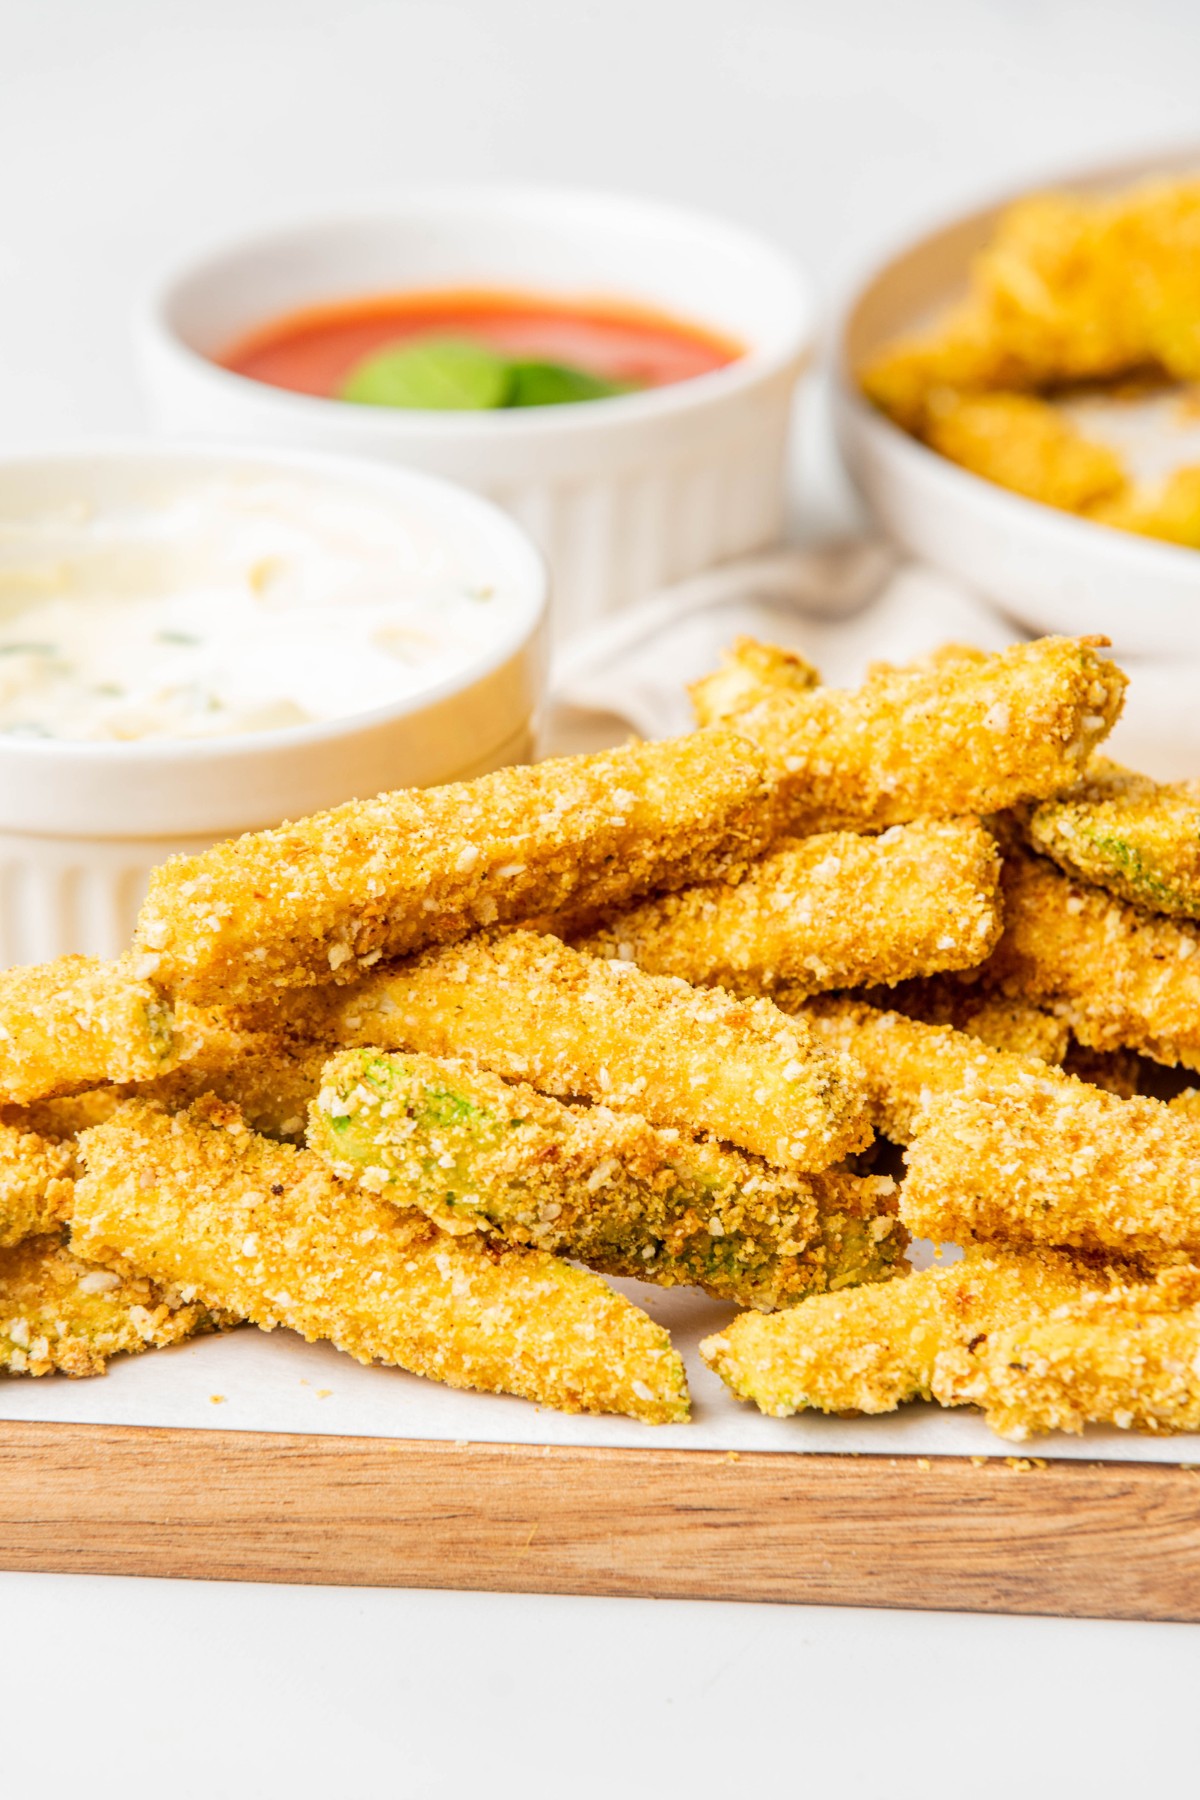 zucchini fries on a wooden board with dipping sauces in the background.